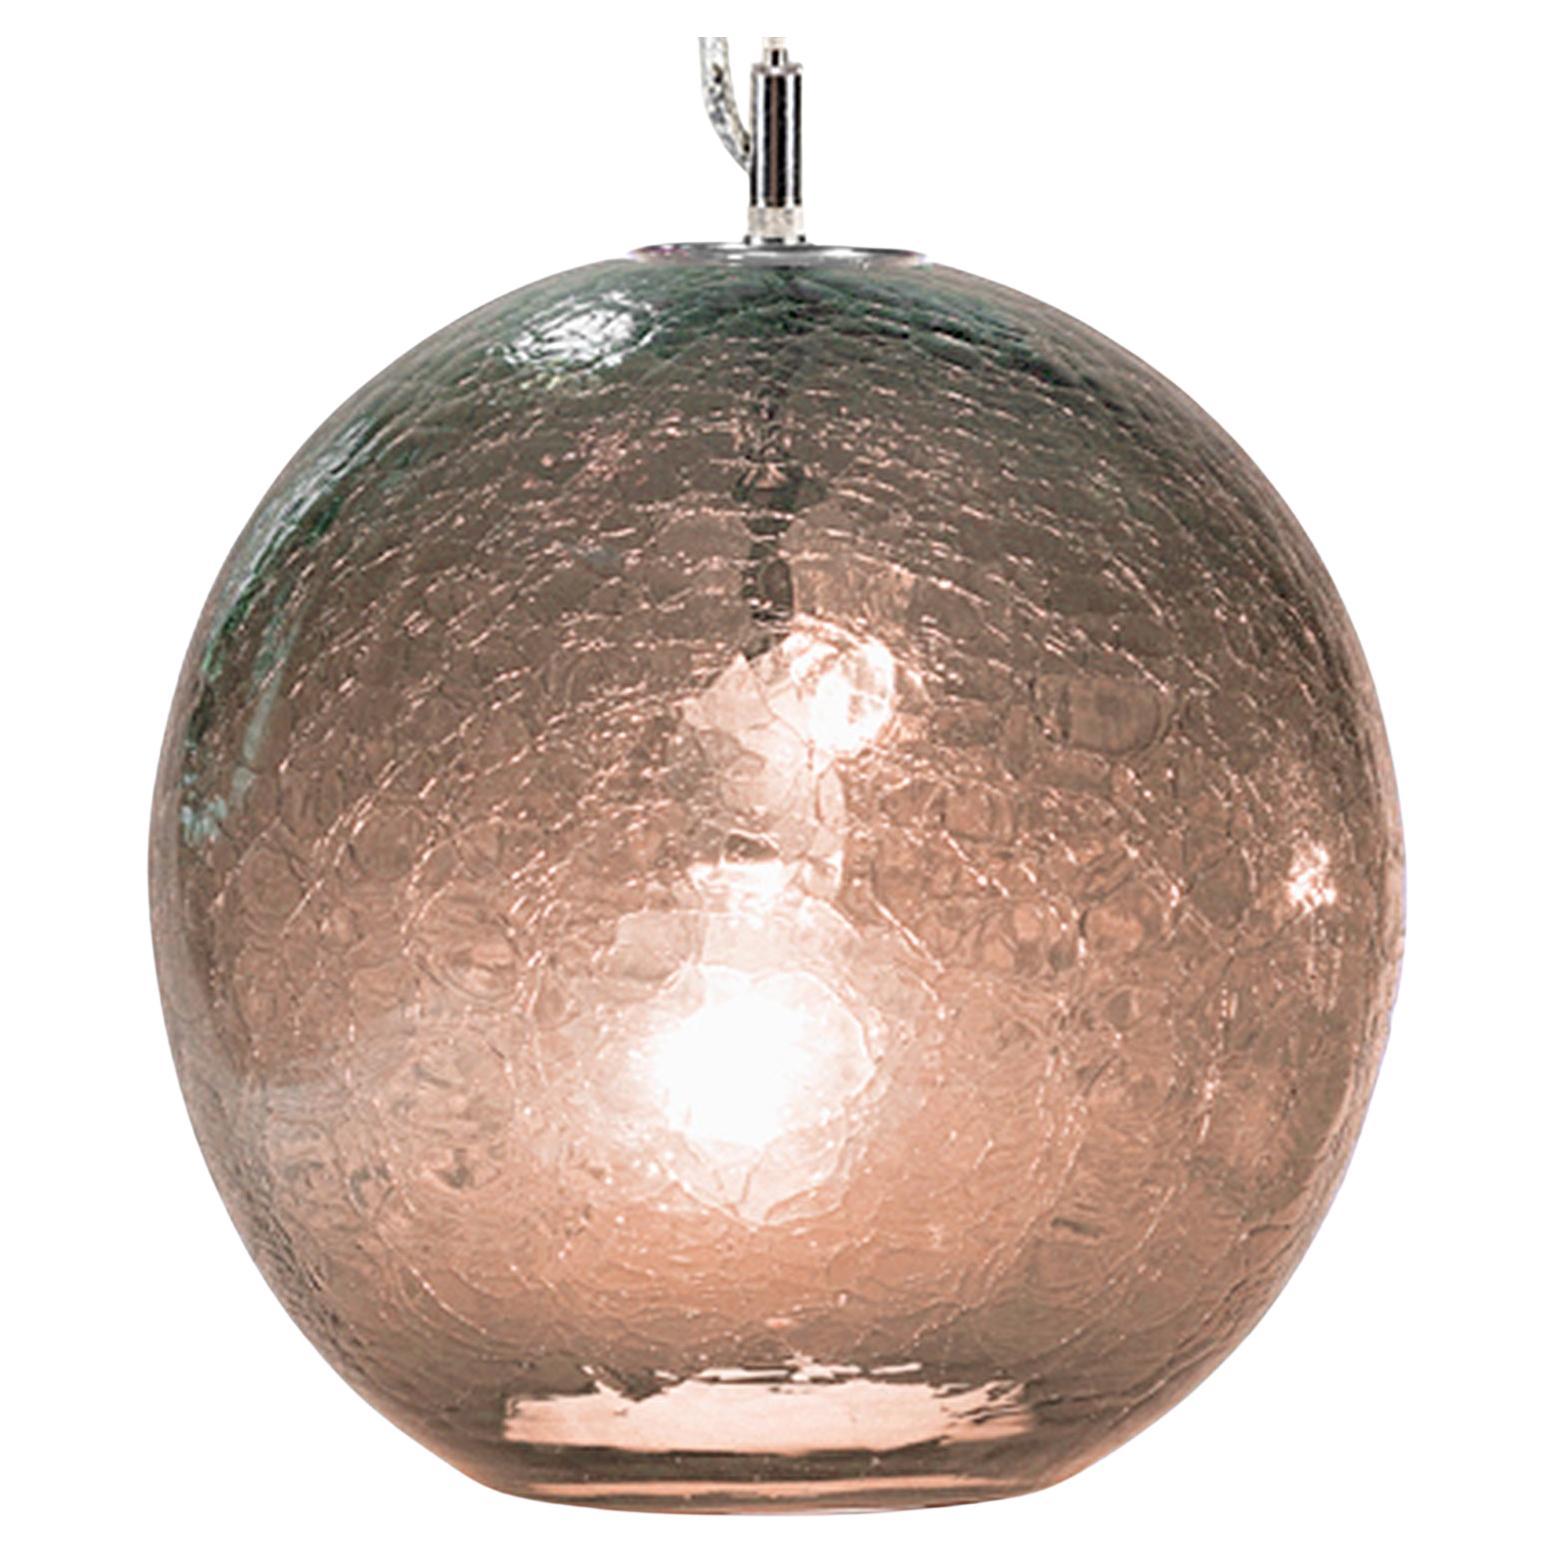 Solaris Pendant in Tea from the Boa Lighting Collection